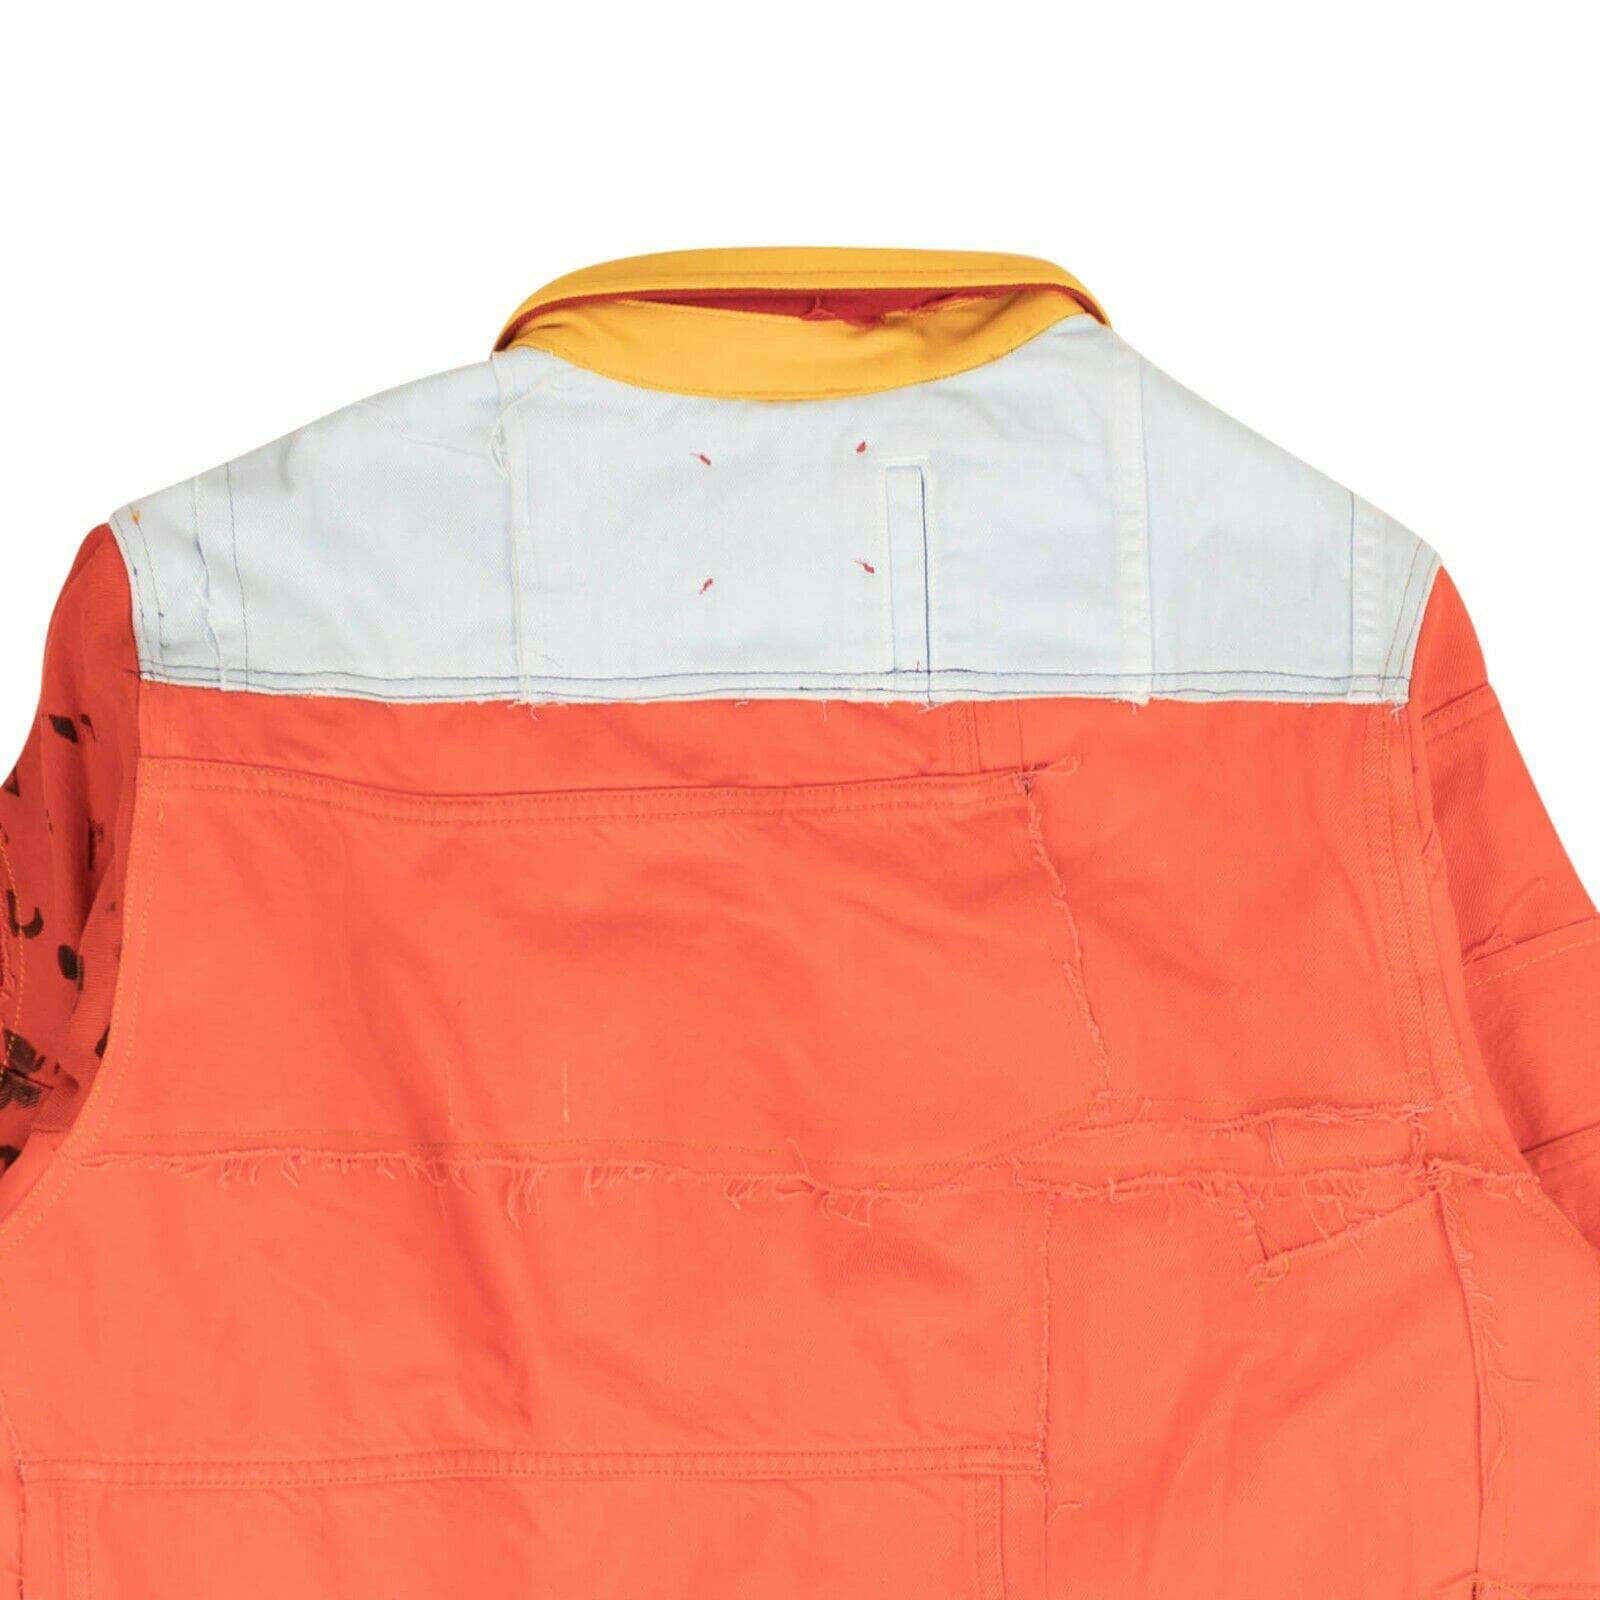 424 ON FAIRFAX 424-on-fairfax, 500-750, channelenable-all, chicmi, couponcollection, gender-mens, main-clothing, mens-shoes, size-l, size-m, size-xl Multicolor Reworked Work Button Down Shirt